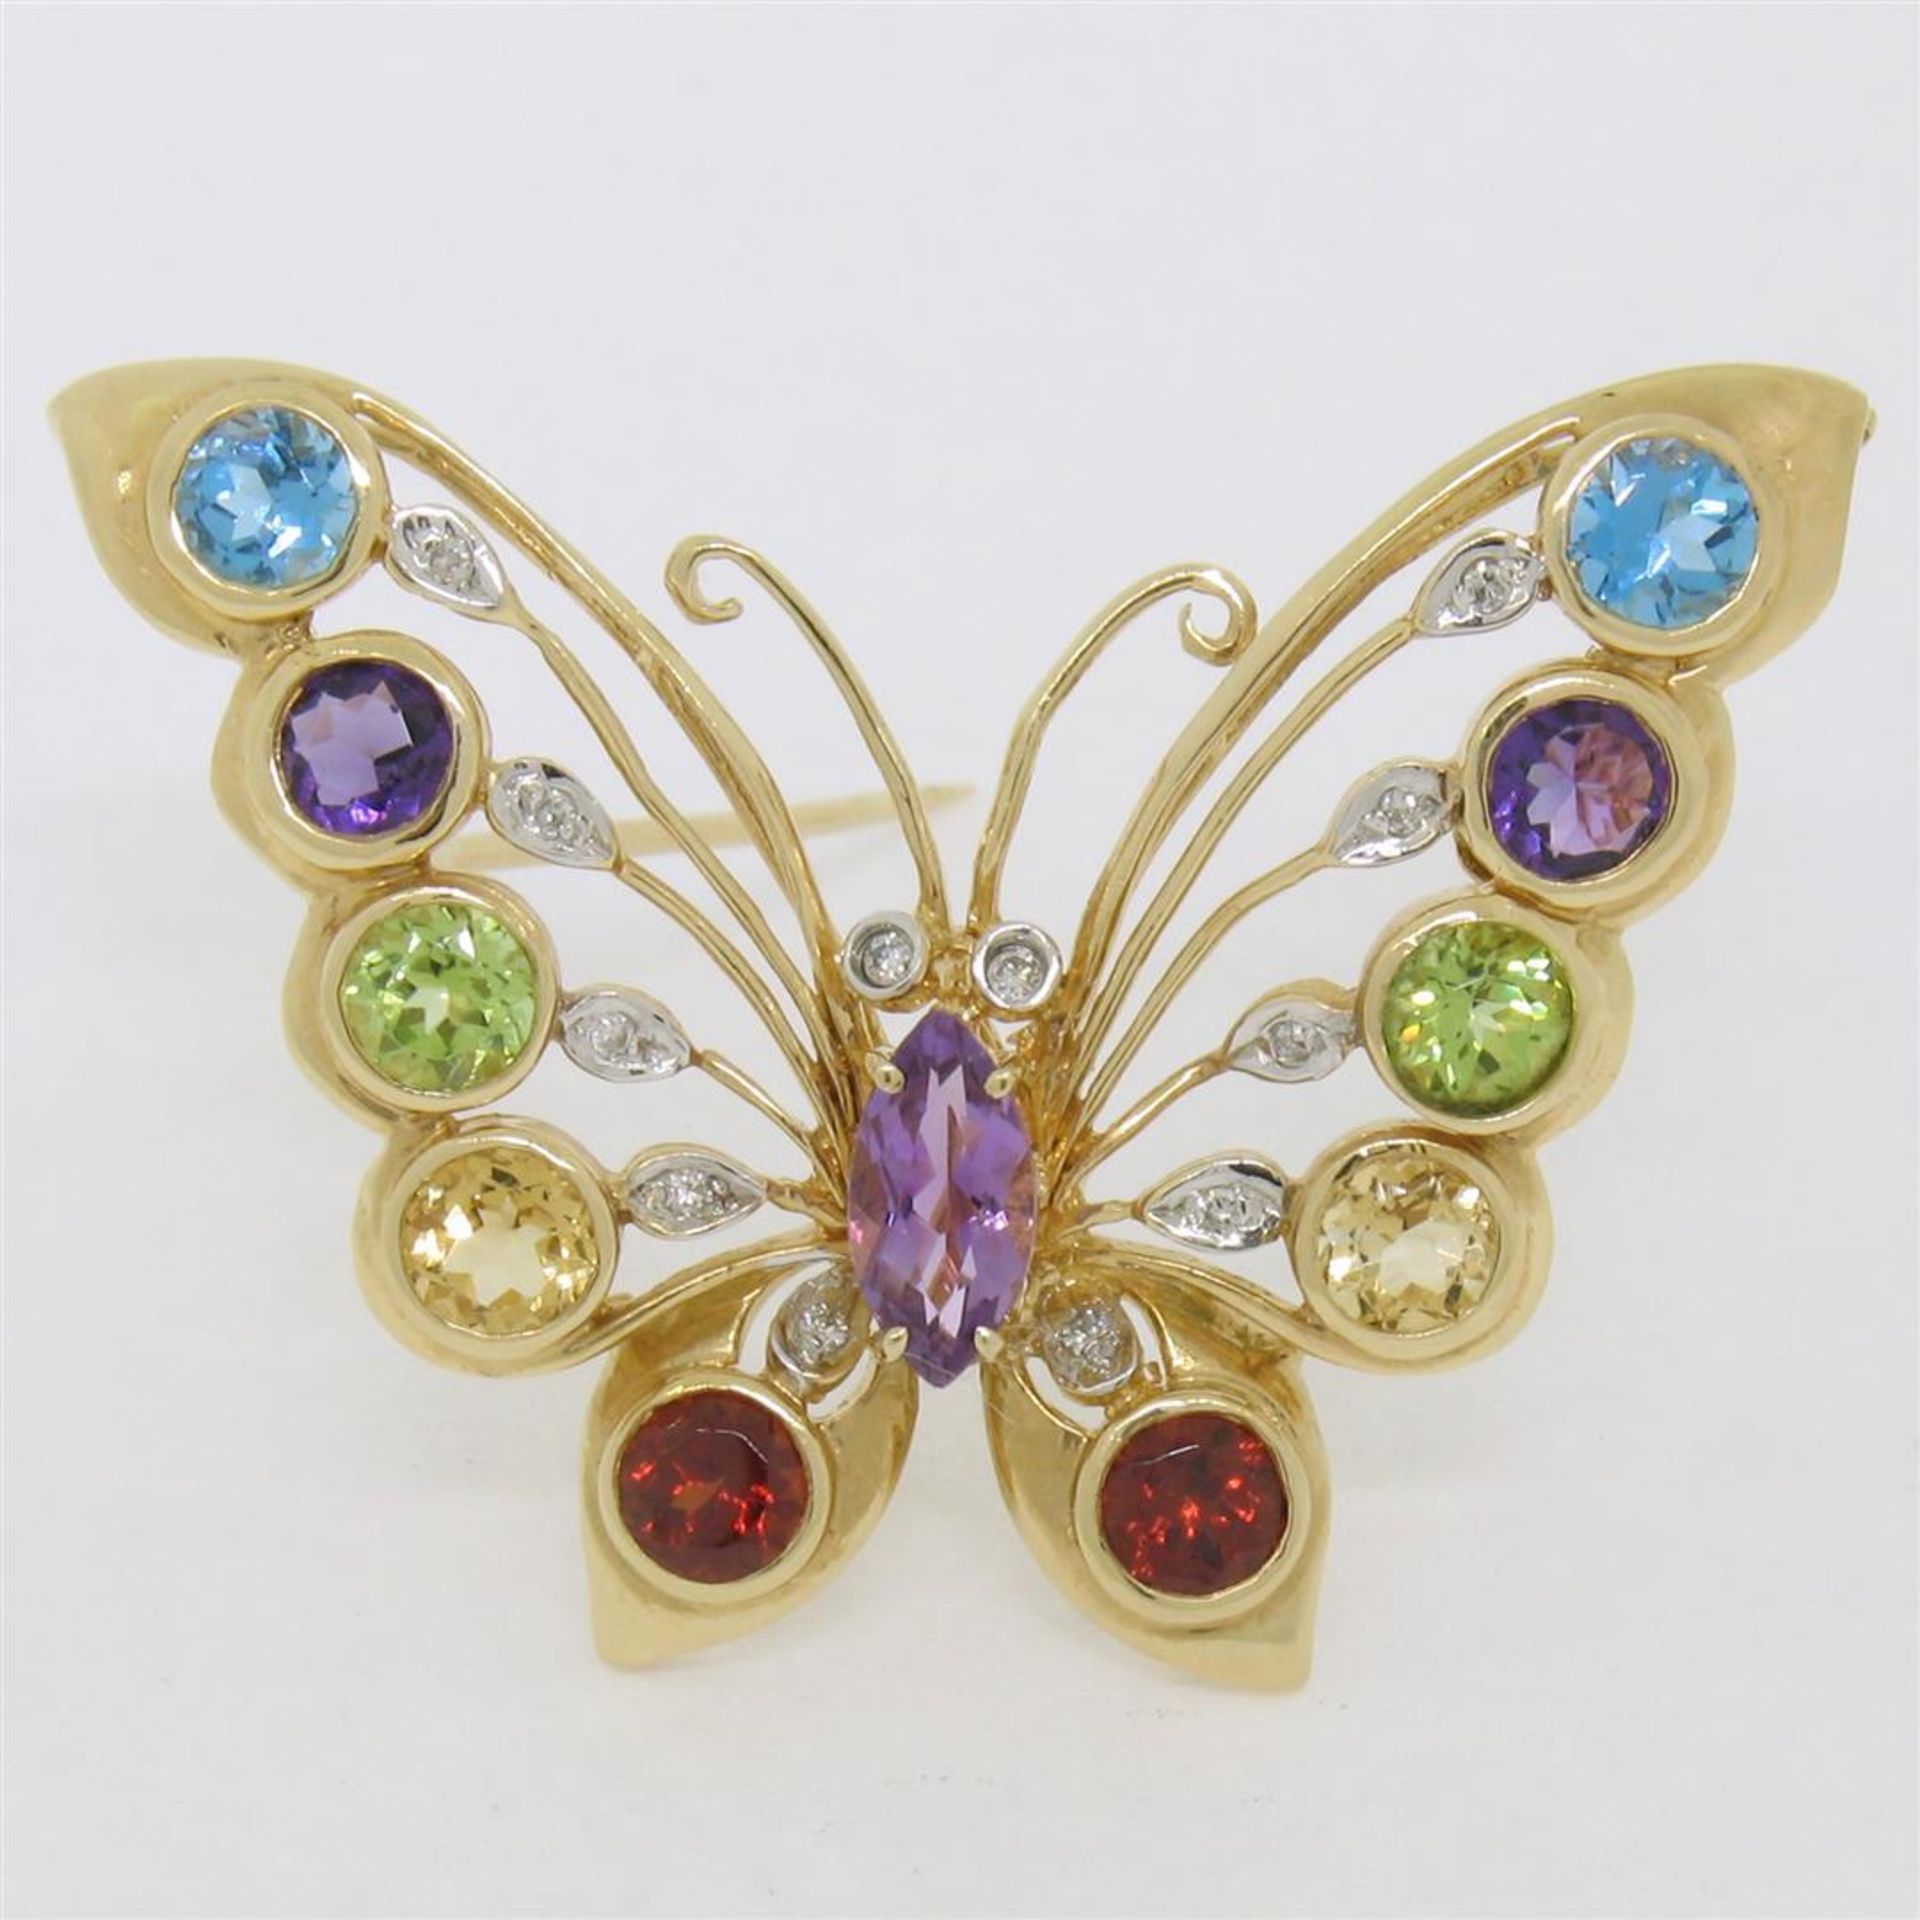 14k Yellow Gold 3.12ct Multi Colored Natural Gemstone & Diamond Butterfly Brooch - Image 3 of 7